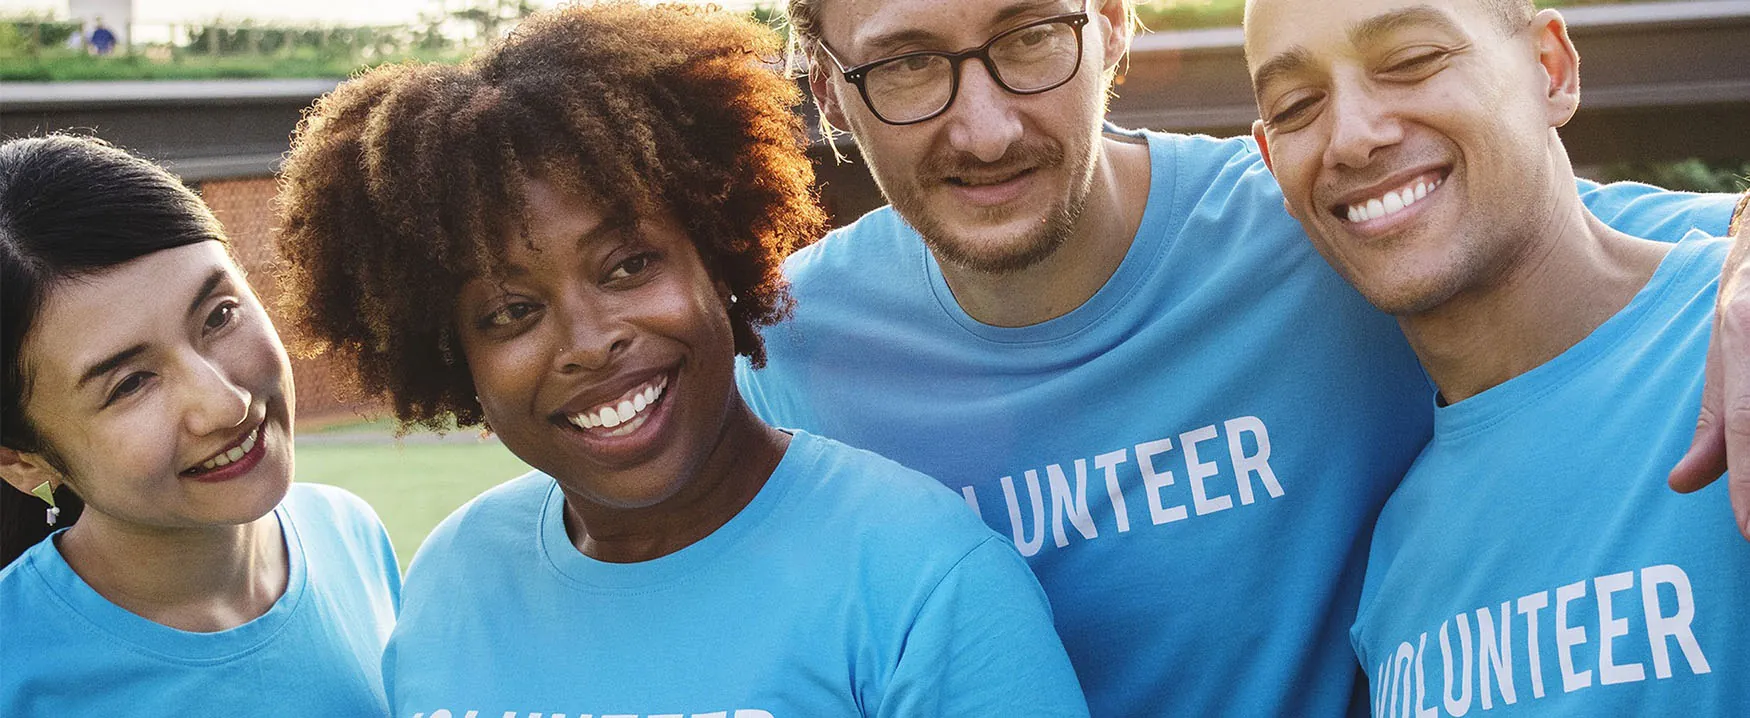 A photograph of a group of men and women smiling. All are wearing shirts bearing the word “volunteer.”